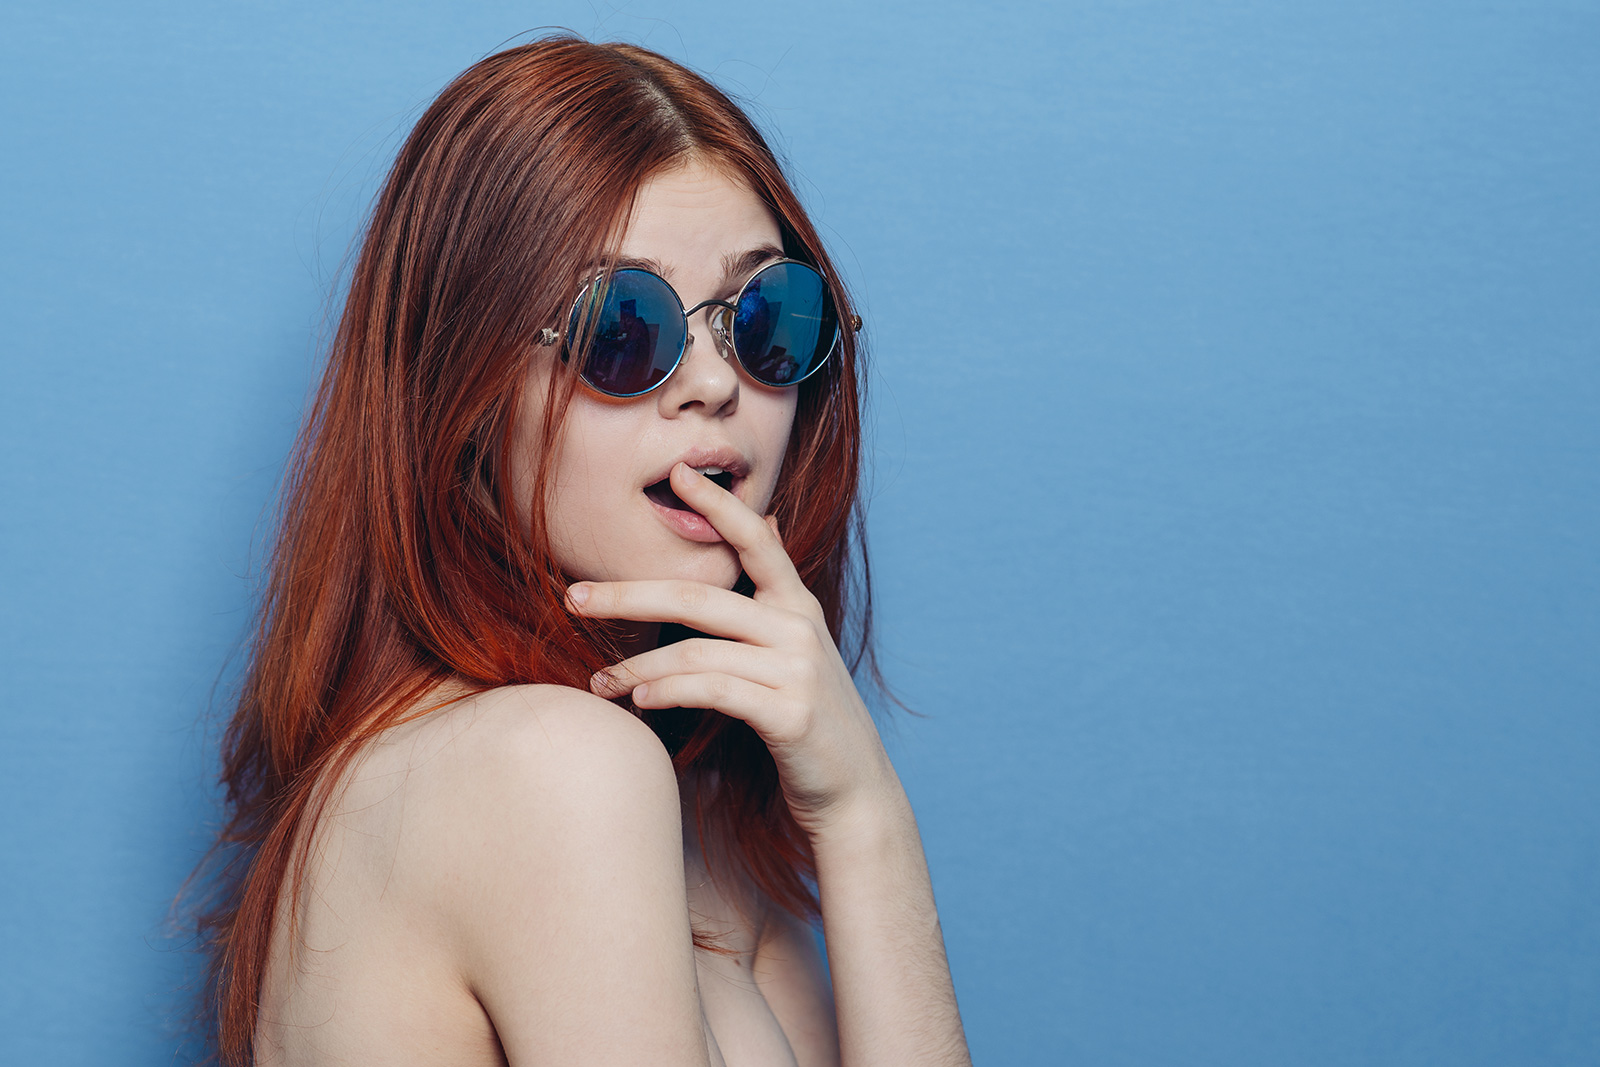 How Can You Buy the Right Prescription Sunglasses?